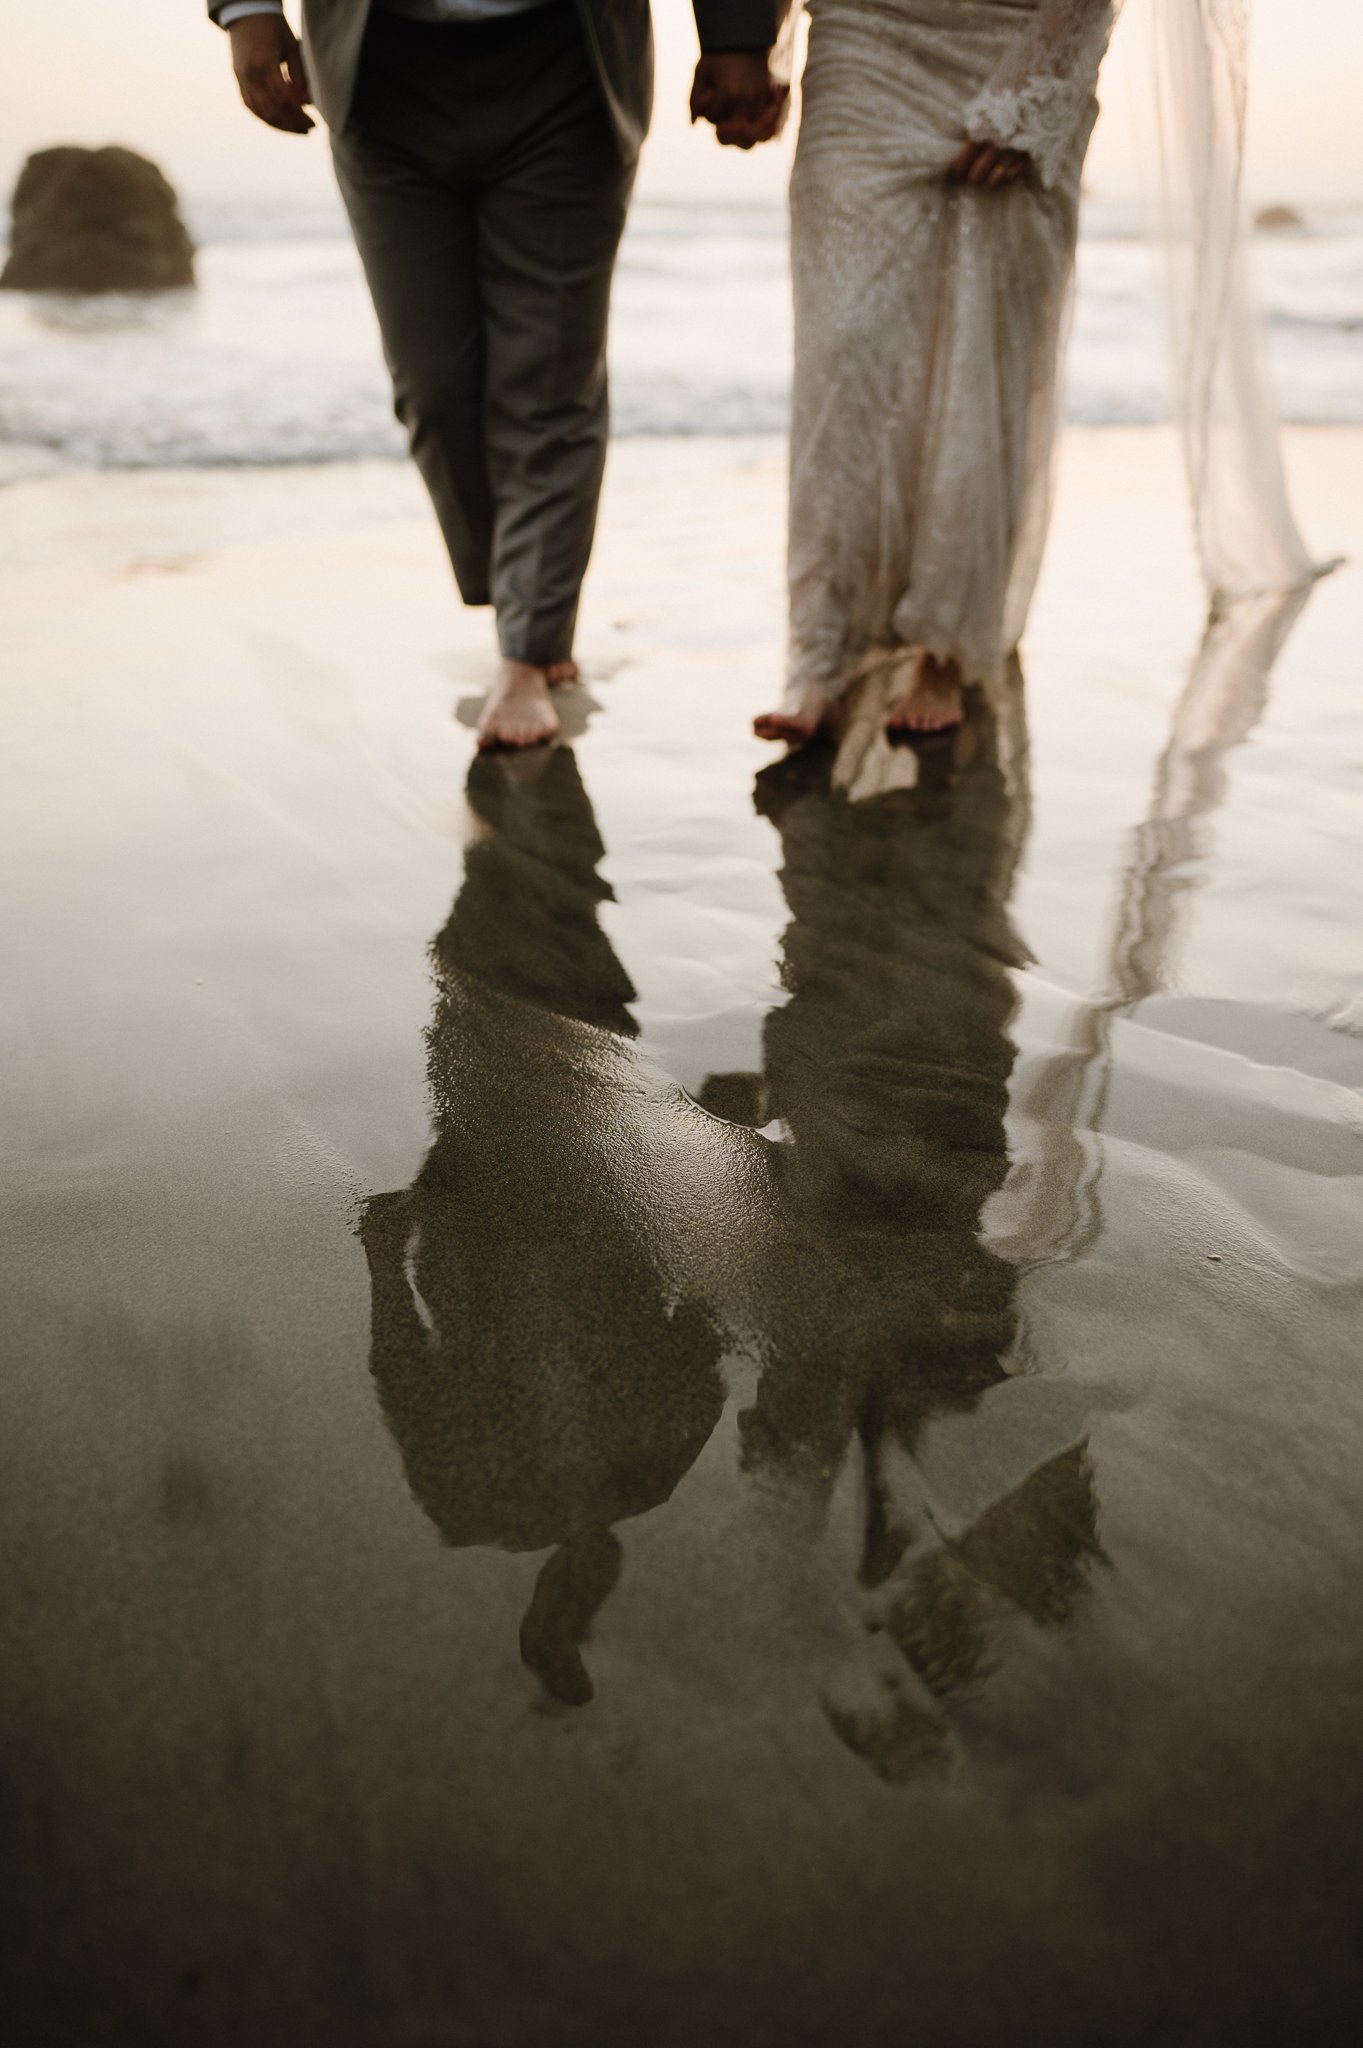 Bride and grooms legs on sandy beach with reflection of themselves in wet sand